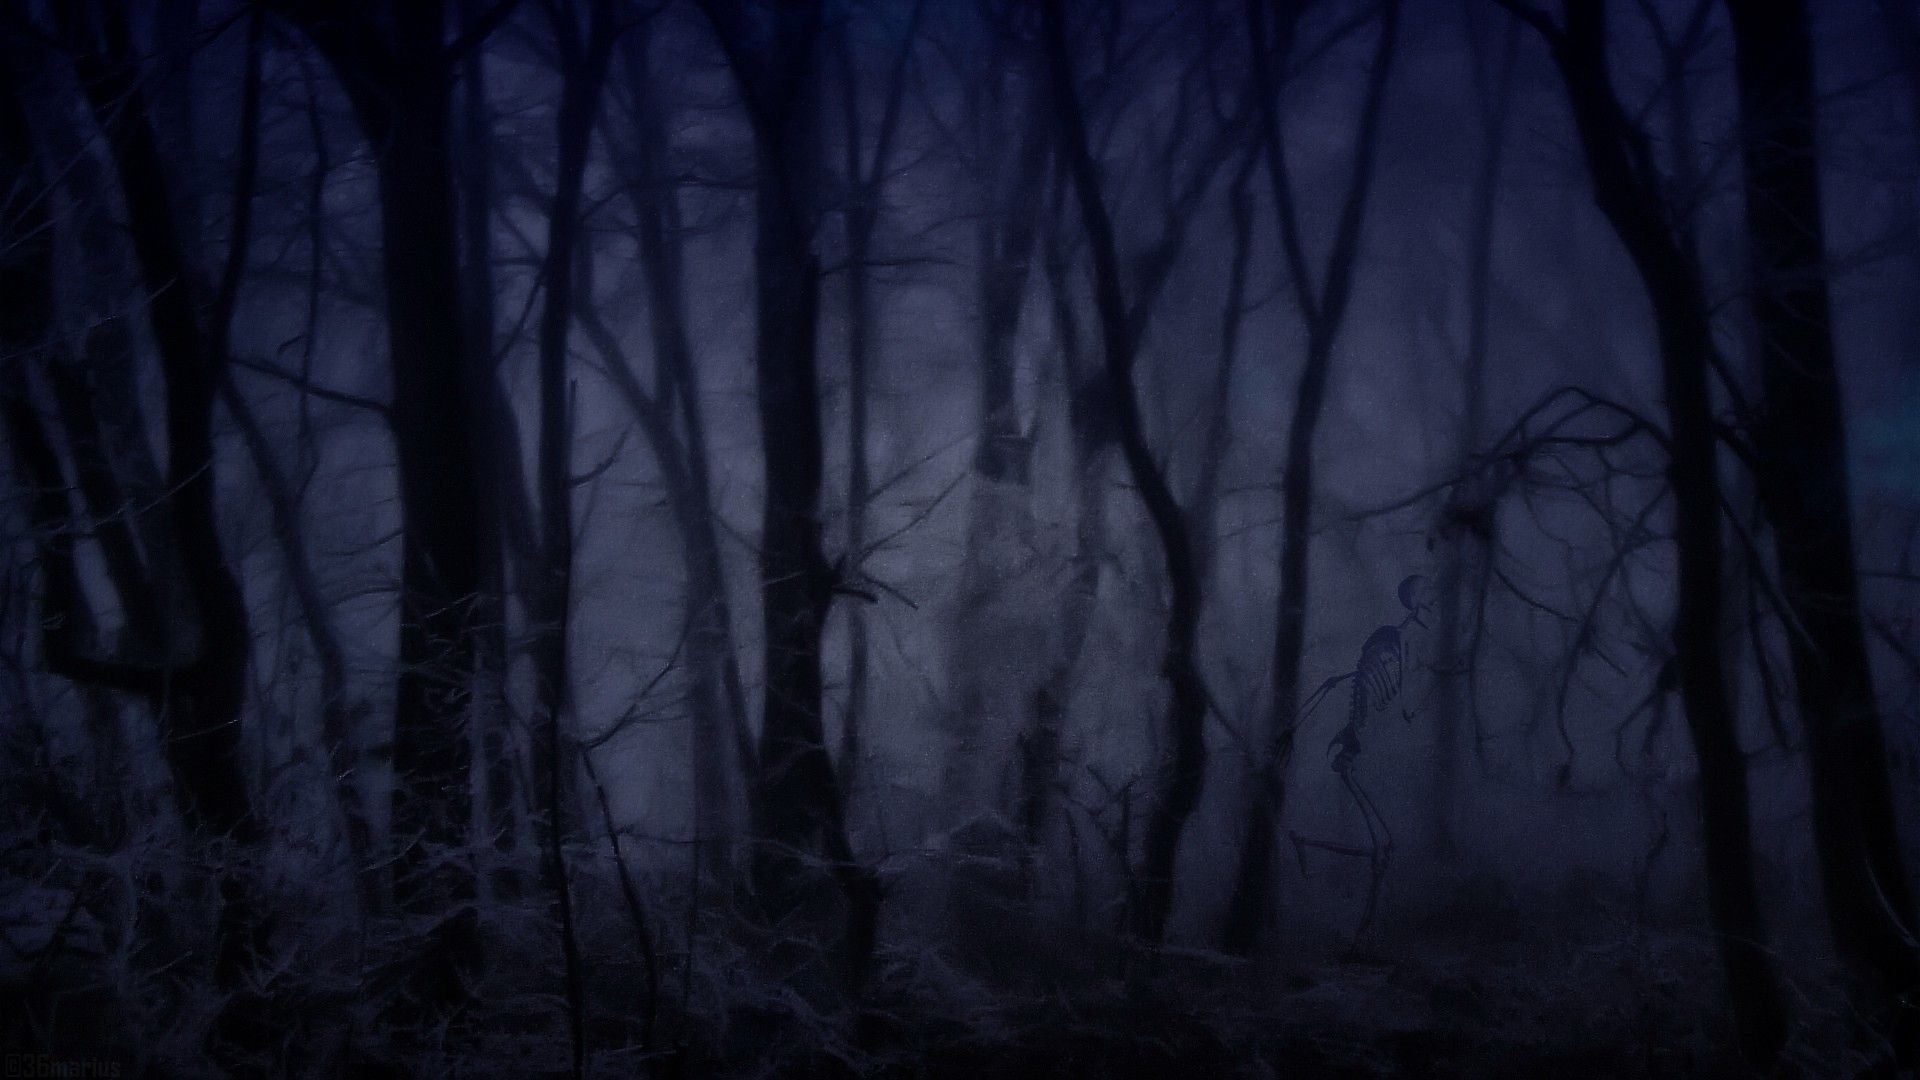 1920x1080 Gallery for - creepy forest backgrounds